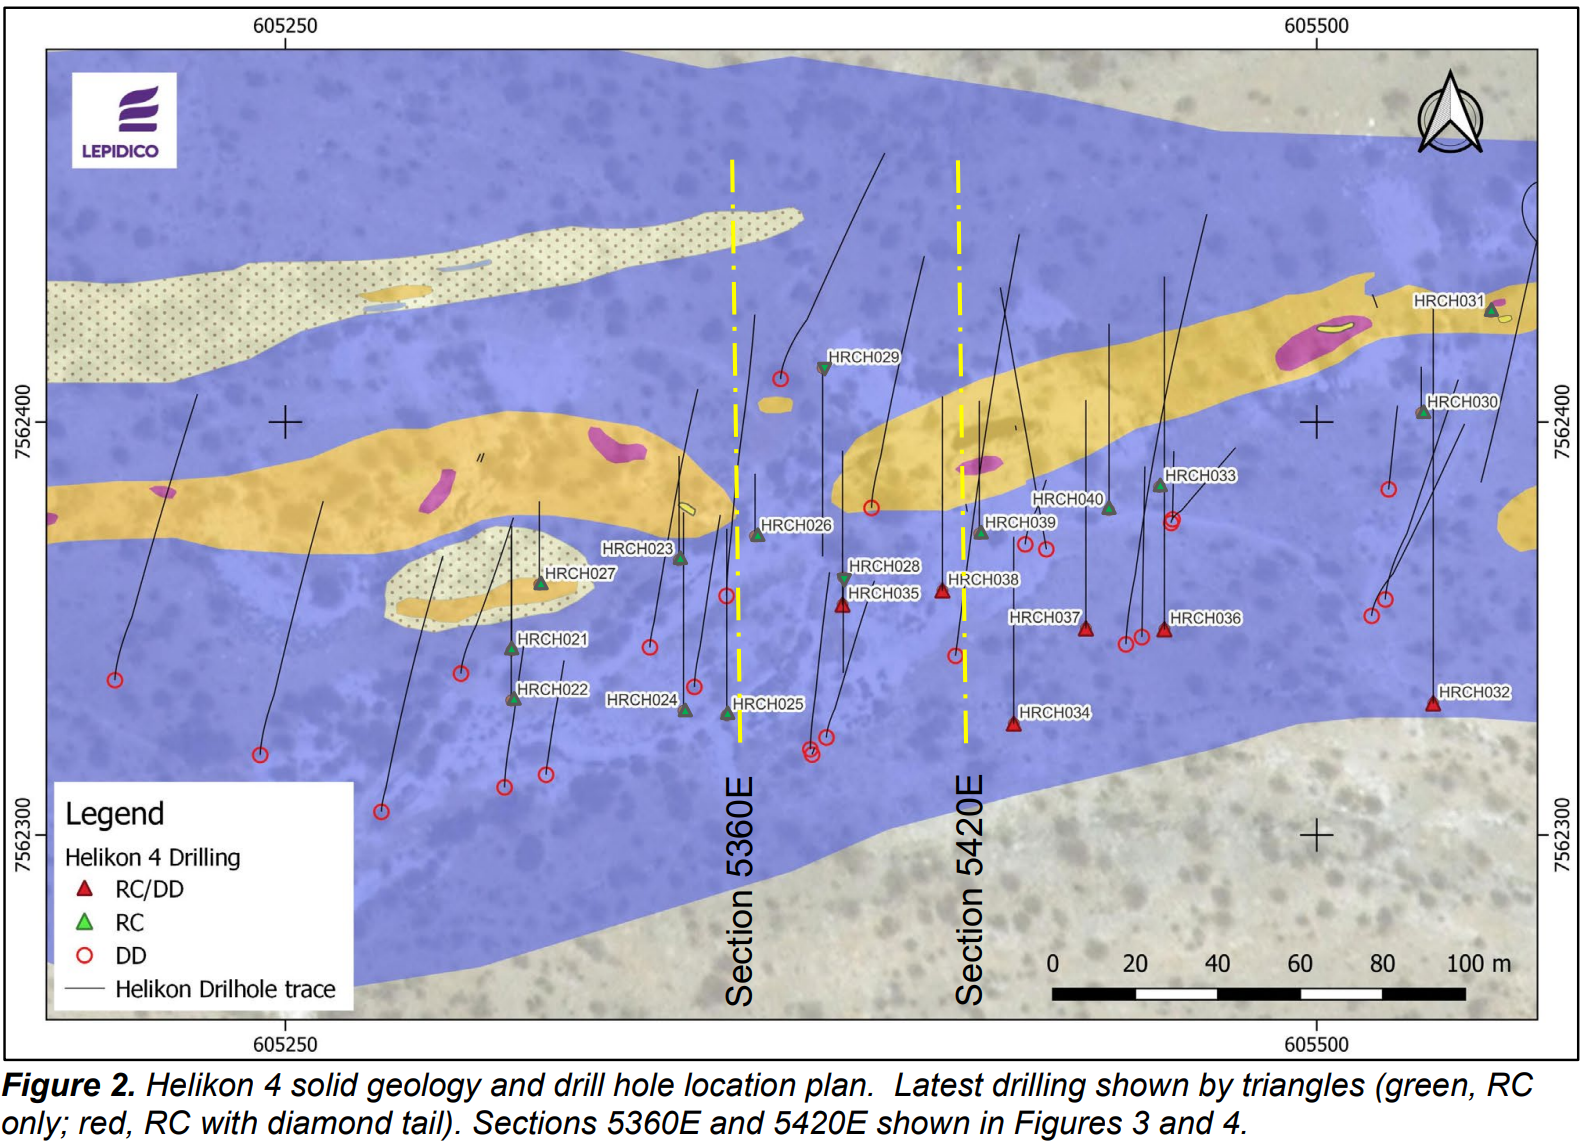 A fairly technical map from the company showing the locations of latest drillholes and drill direction 